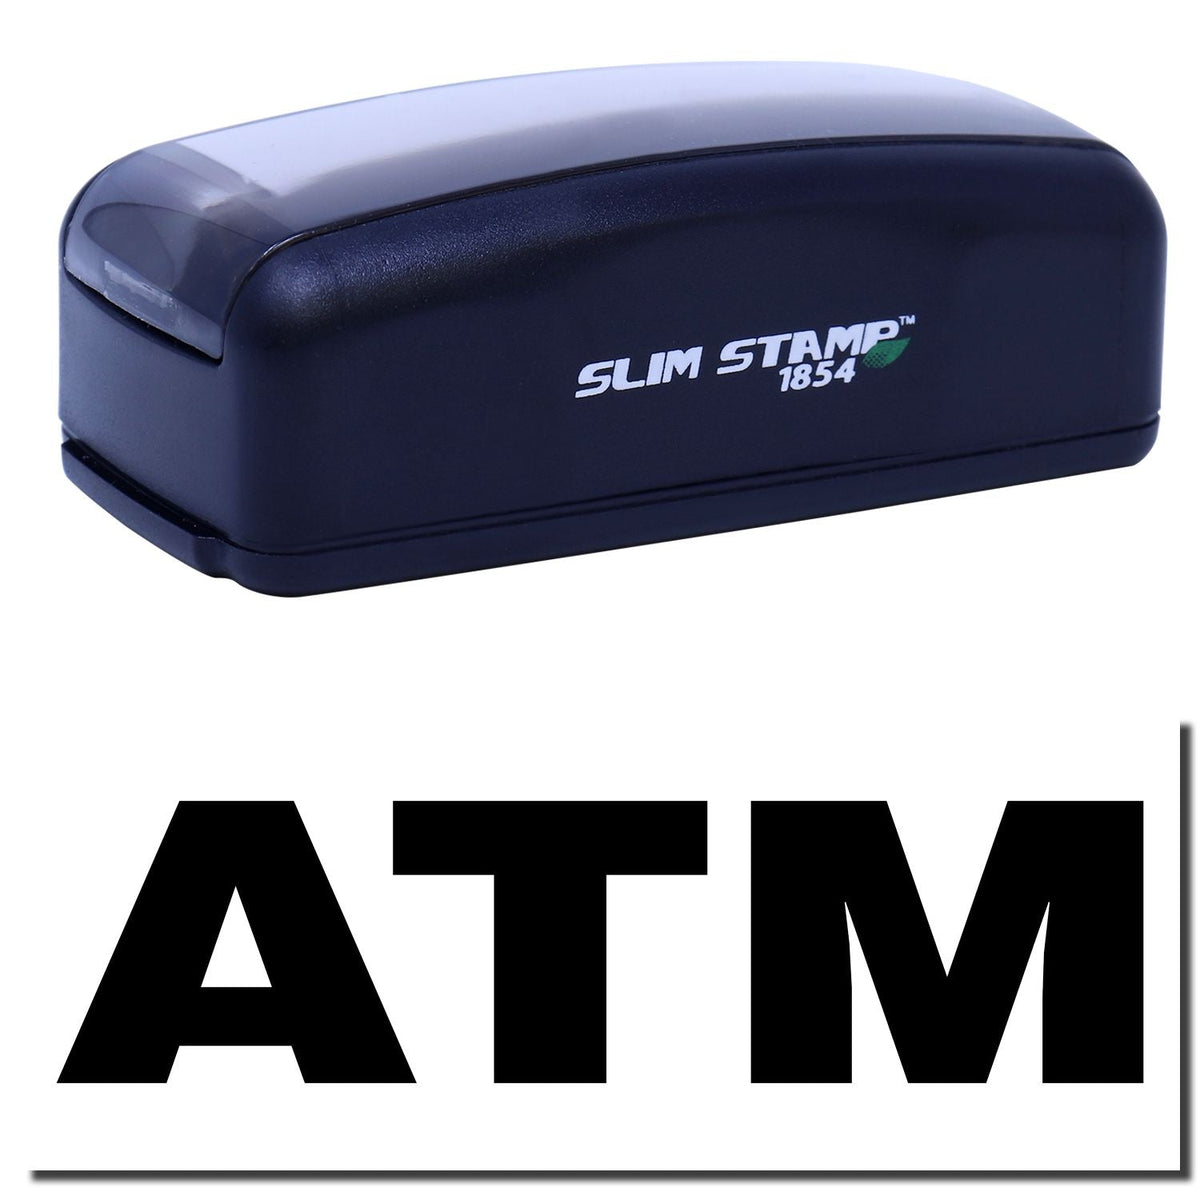 A stock office pre-inked stamp with a stamped image showing how the text &quot;ATM&quot; in a large font is displayed after stamping.